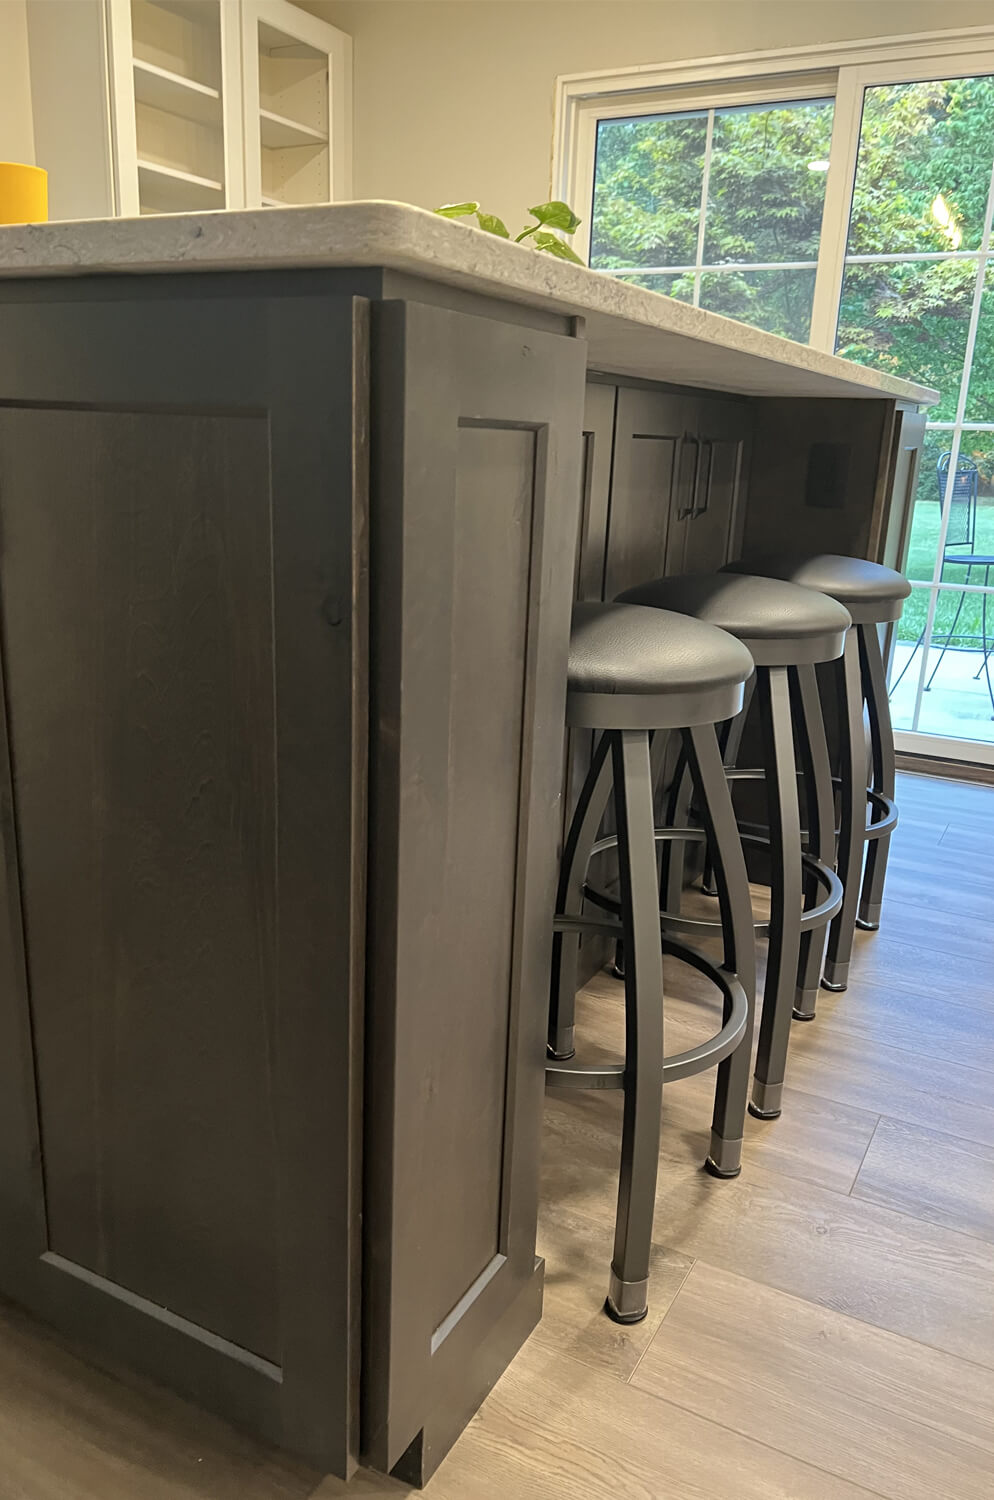 Holland's Misha Pewter Backless Swivel Bar Stool in Customer's Kitchen